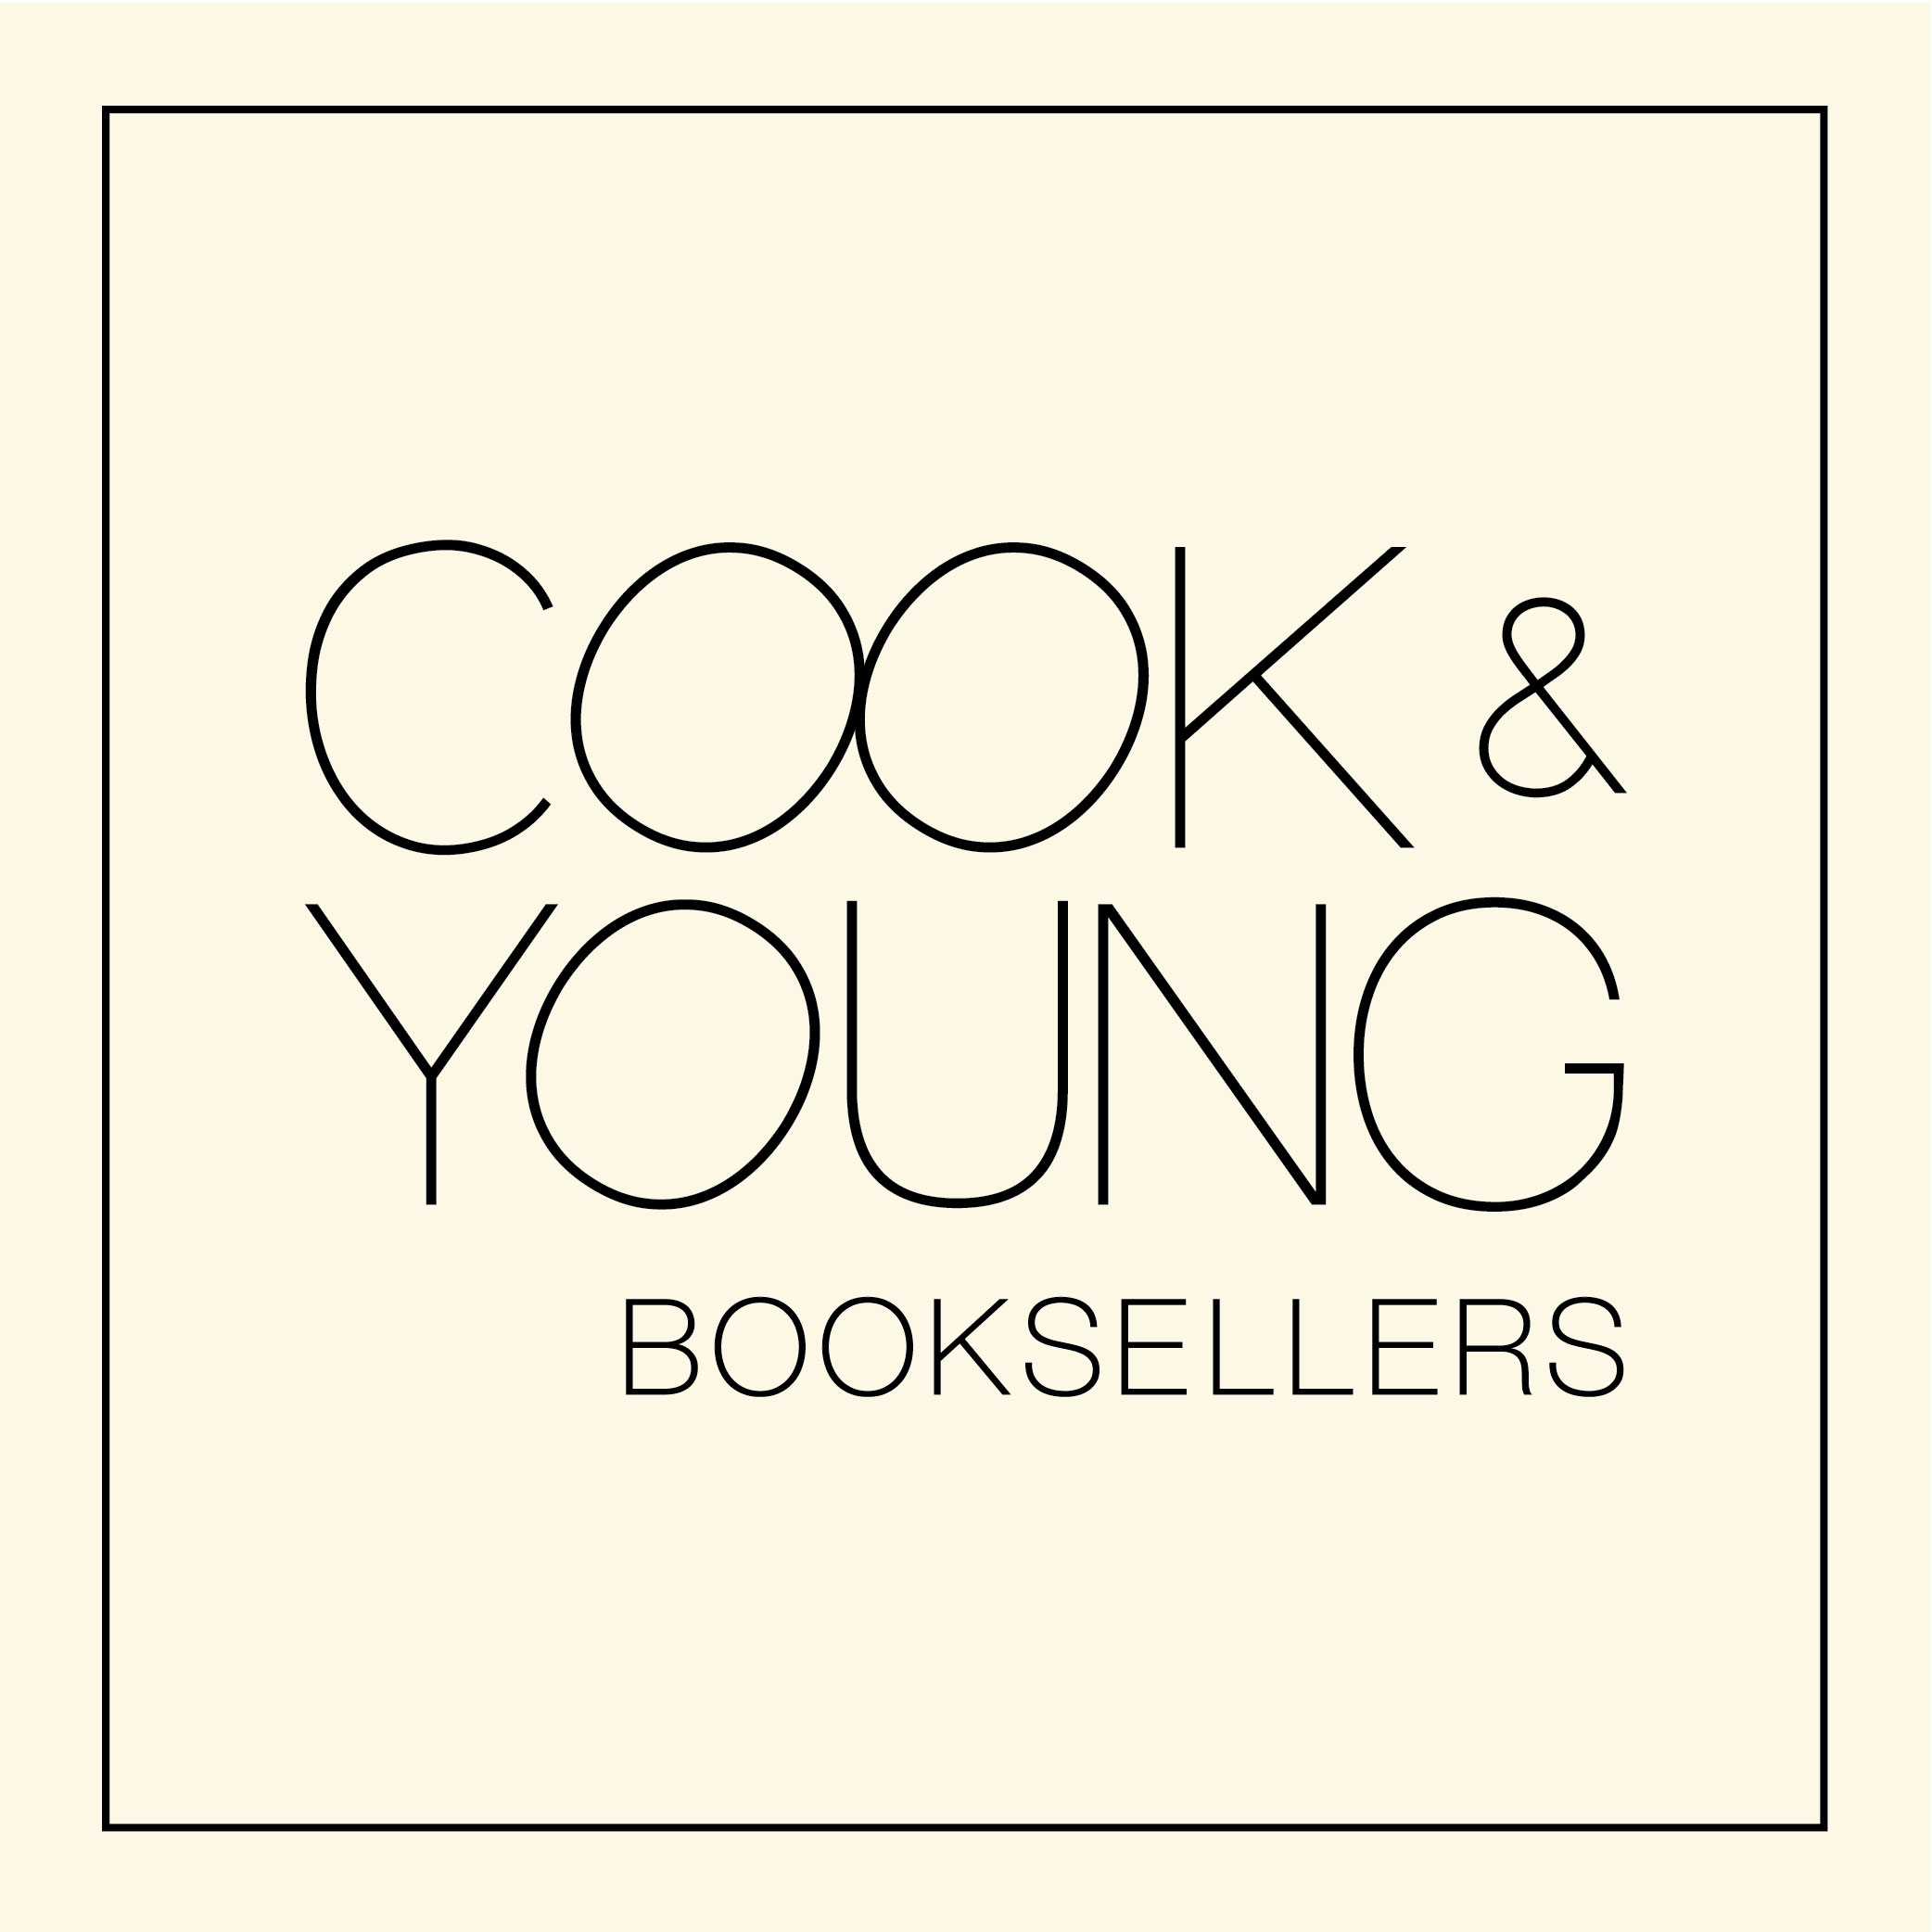 Cook & Young Booksellers logo